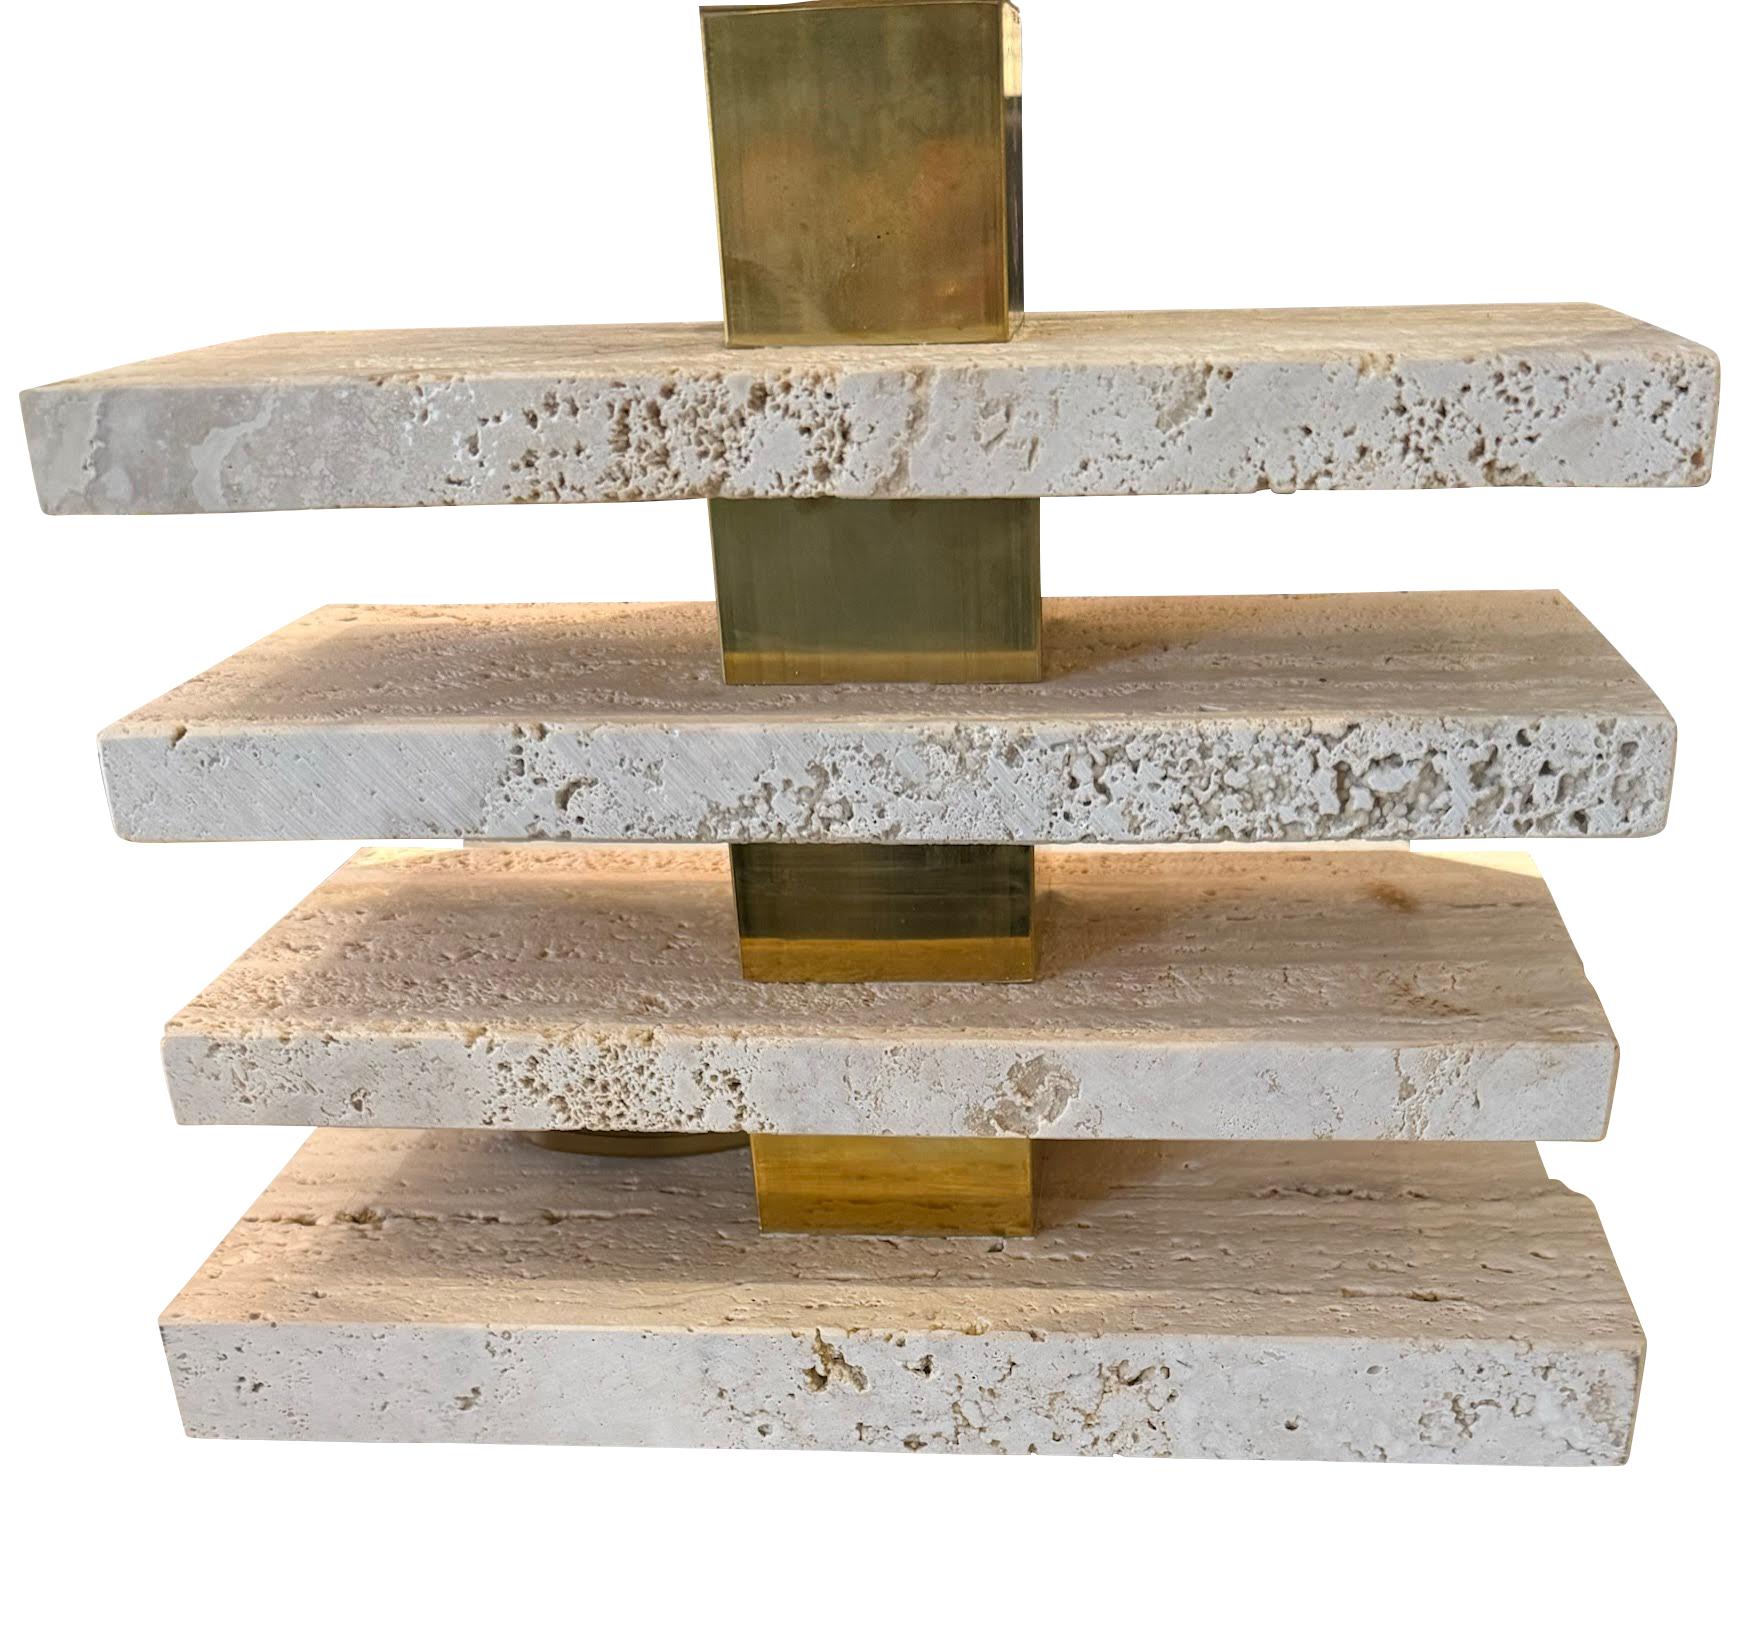 Contemporary Italian pair of stacked rectangular shaped travertine lamps.
Honed and unfilled finish.
Shades included.
Shades measure 15.5 diameter.
Base measures 11